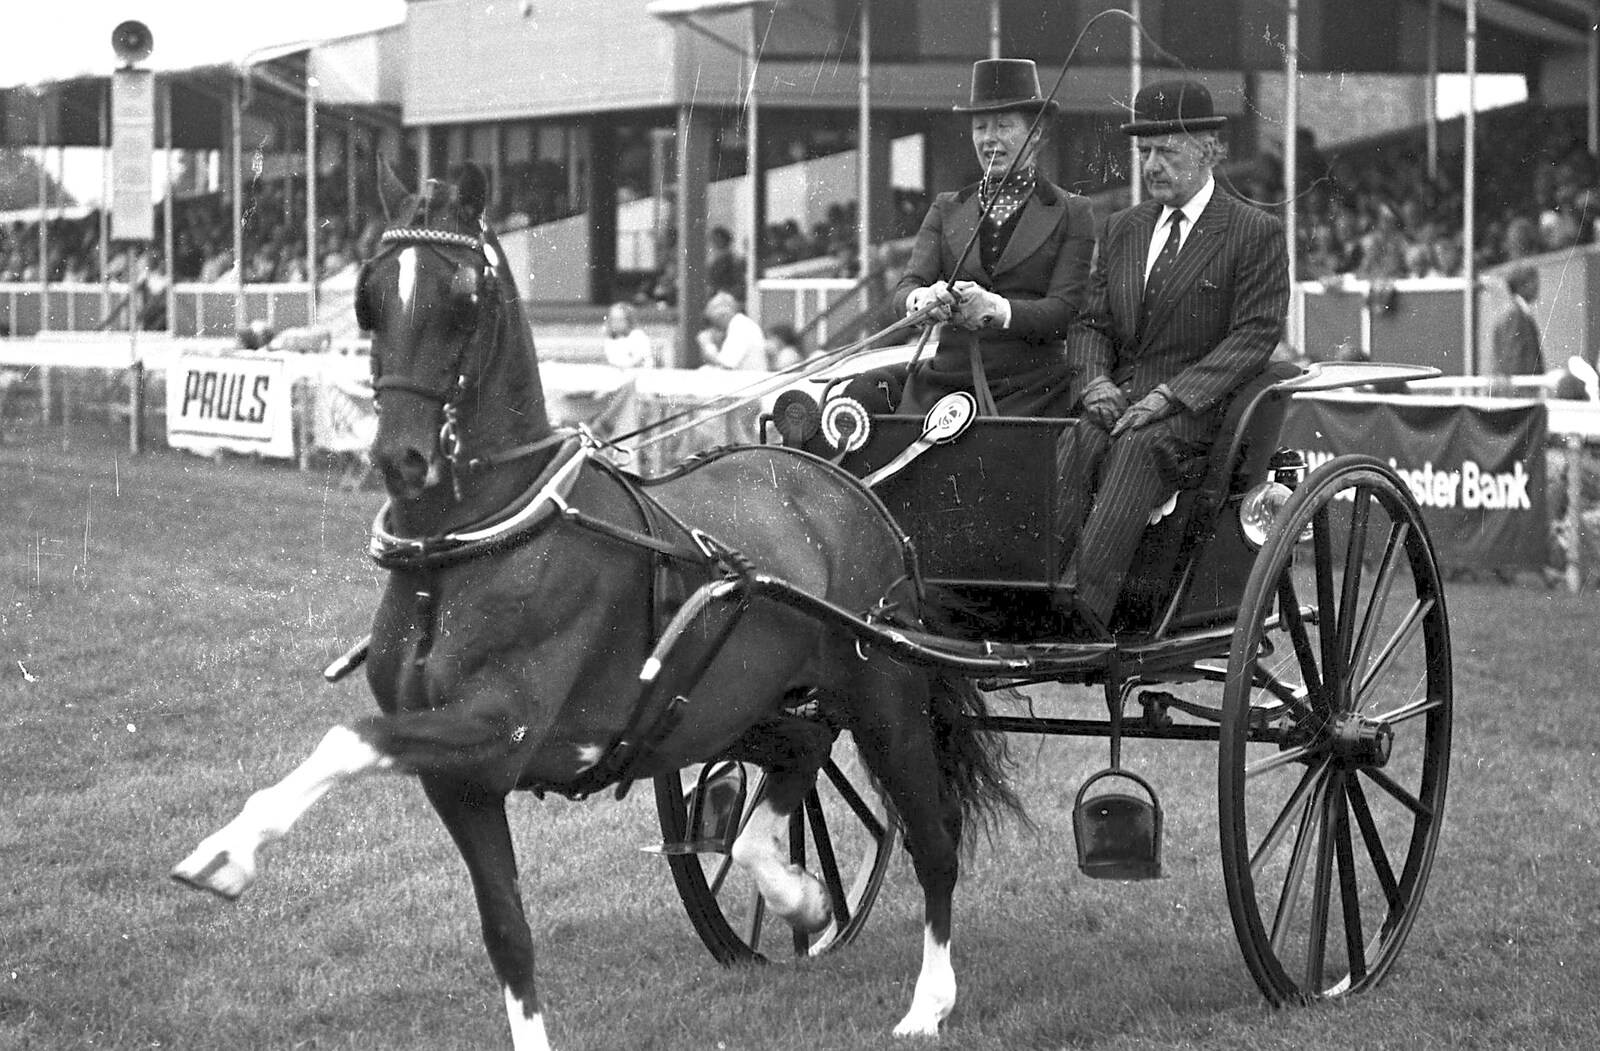 A horse prances around the show ring from The Royal Norfolk Show, Costessey Showground, Norwich - June 20th 1994